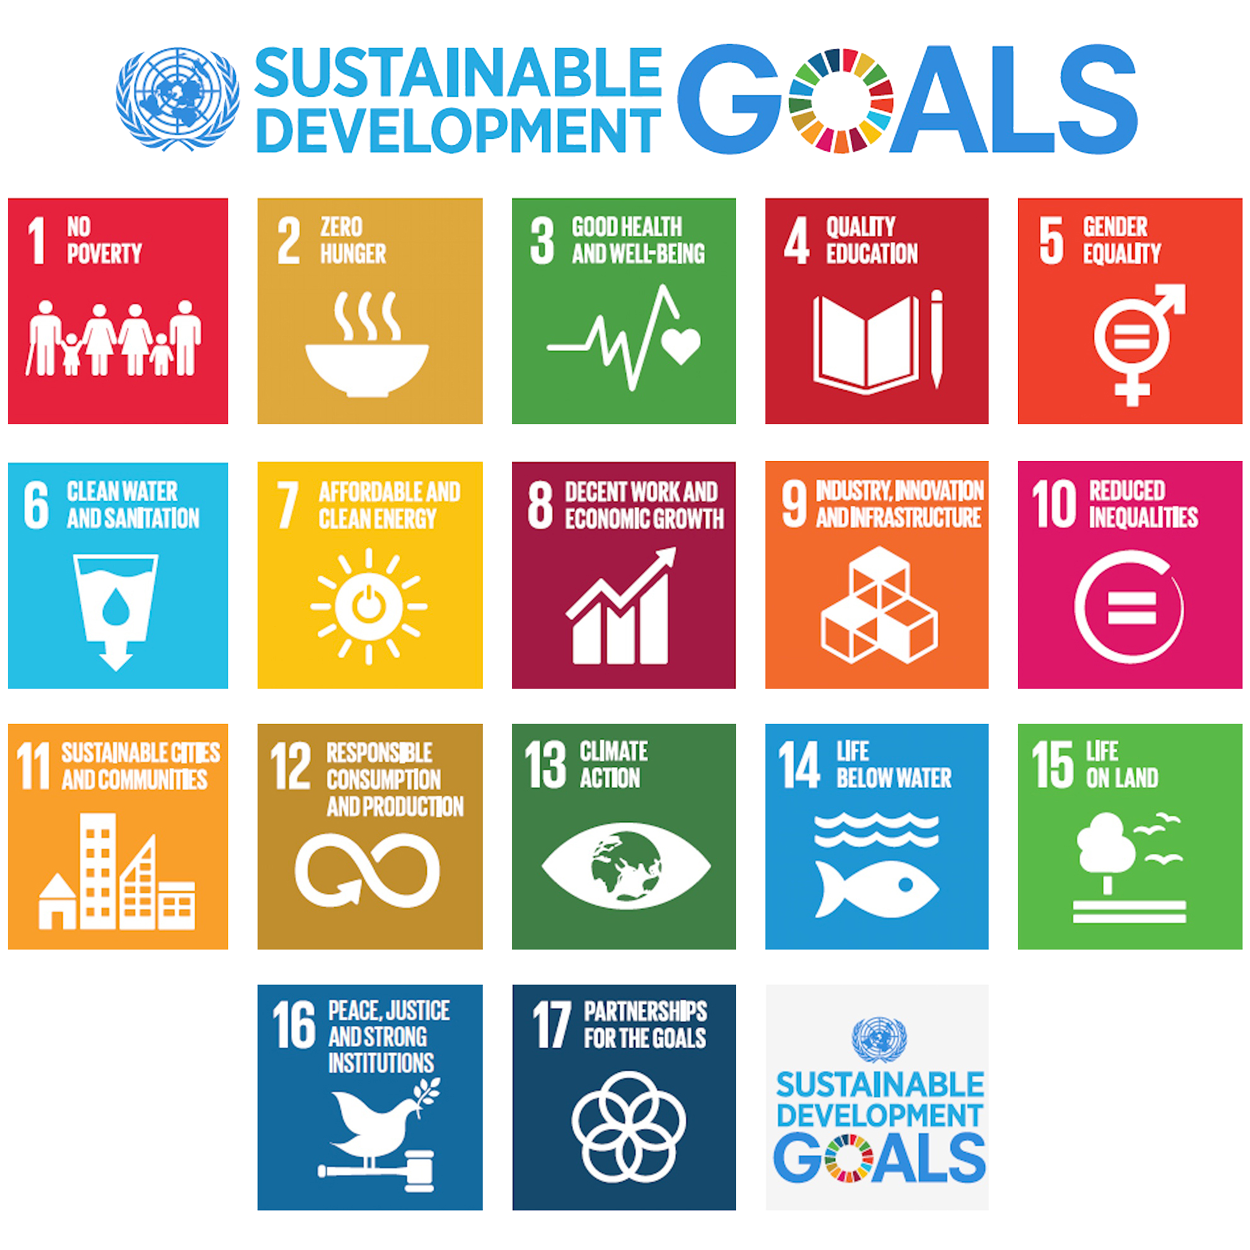 0 Result Images of Sustainable Development Goals Logo Png - PNG Image ...